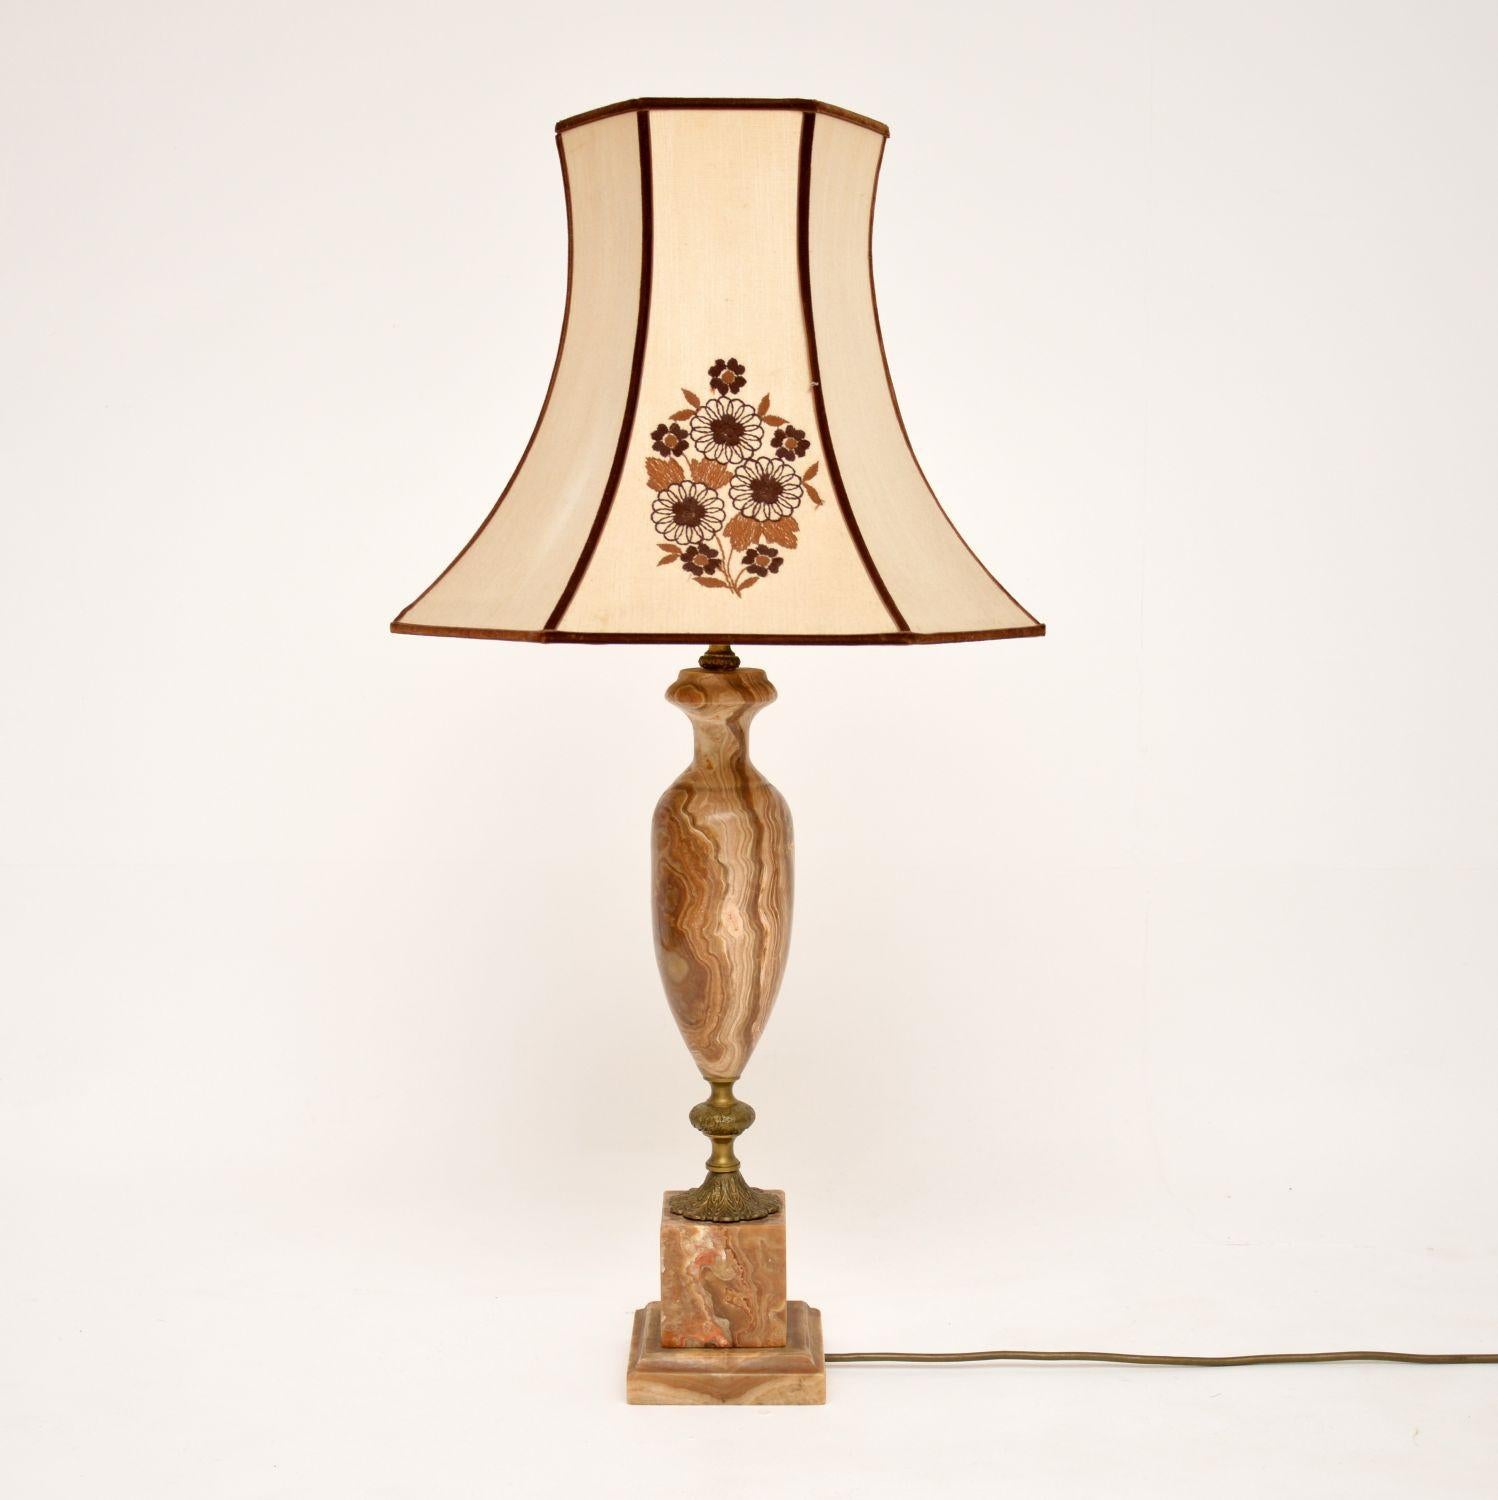 A gorgeous, quite large and impressive antique table lamp in onyx and gilt metal. This was made in England, it dates from around the 1930-50’s period.

It is of excellent quality, the onyx has stunning colours and patterns. The gilt metal fixtures